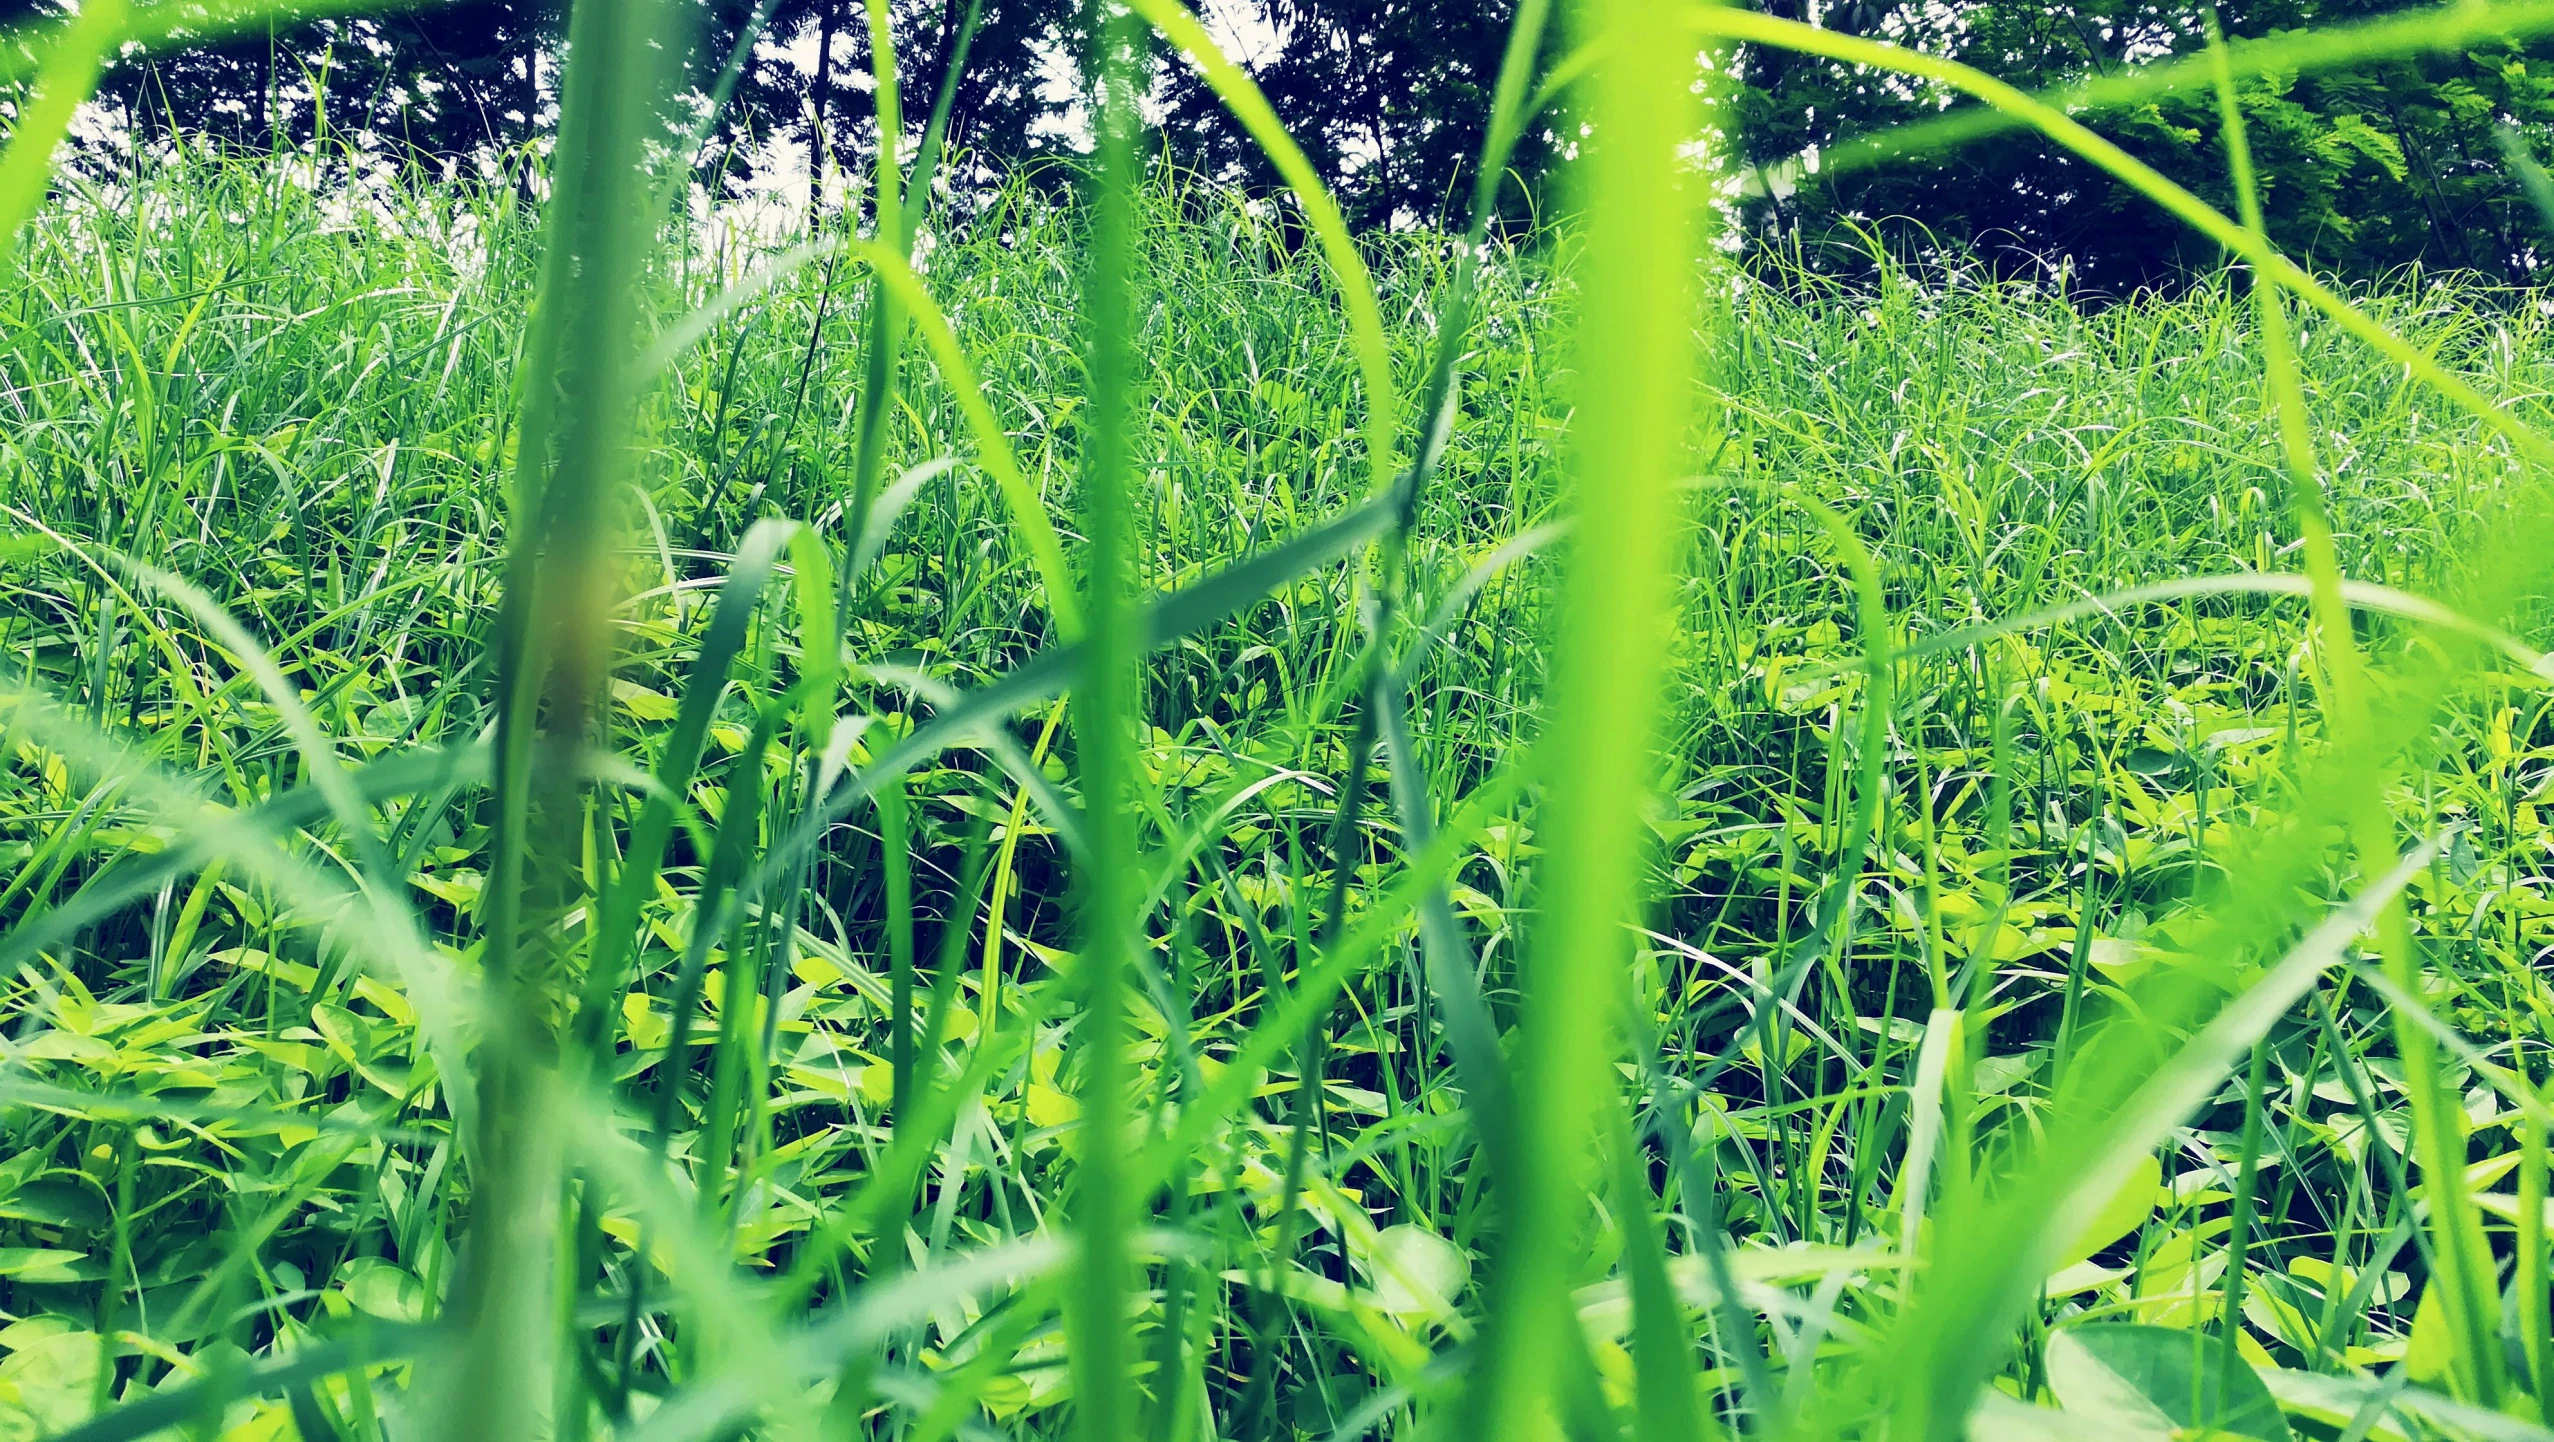 a field of green grass with trees in the background, a picture, by Thomas Häfner, happening, stems, instagram picture, “organic, hiding in grass